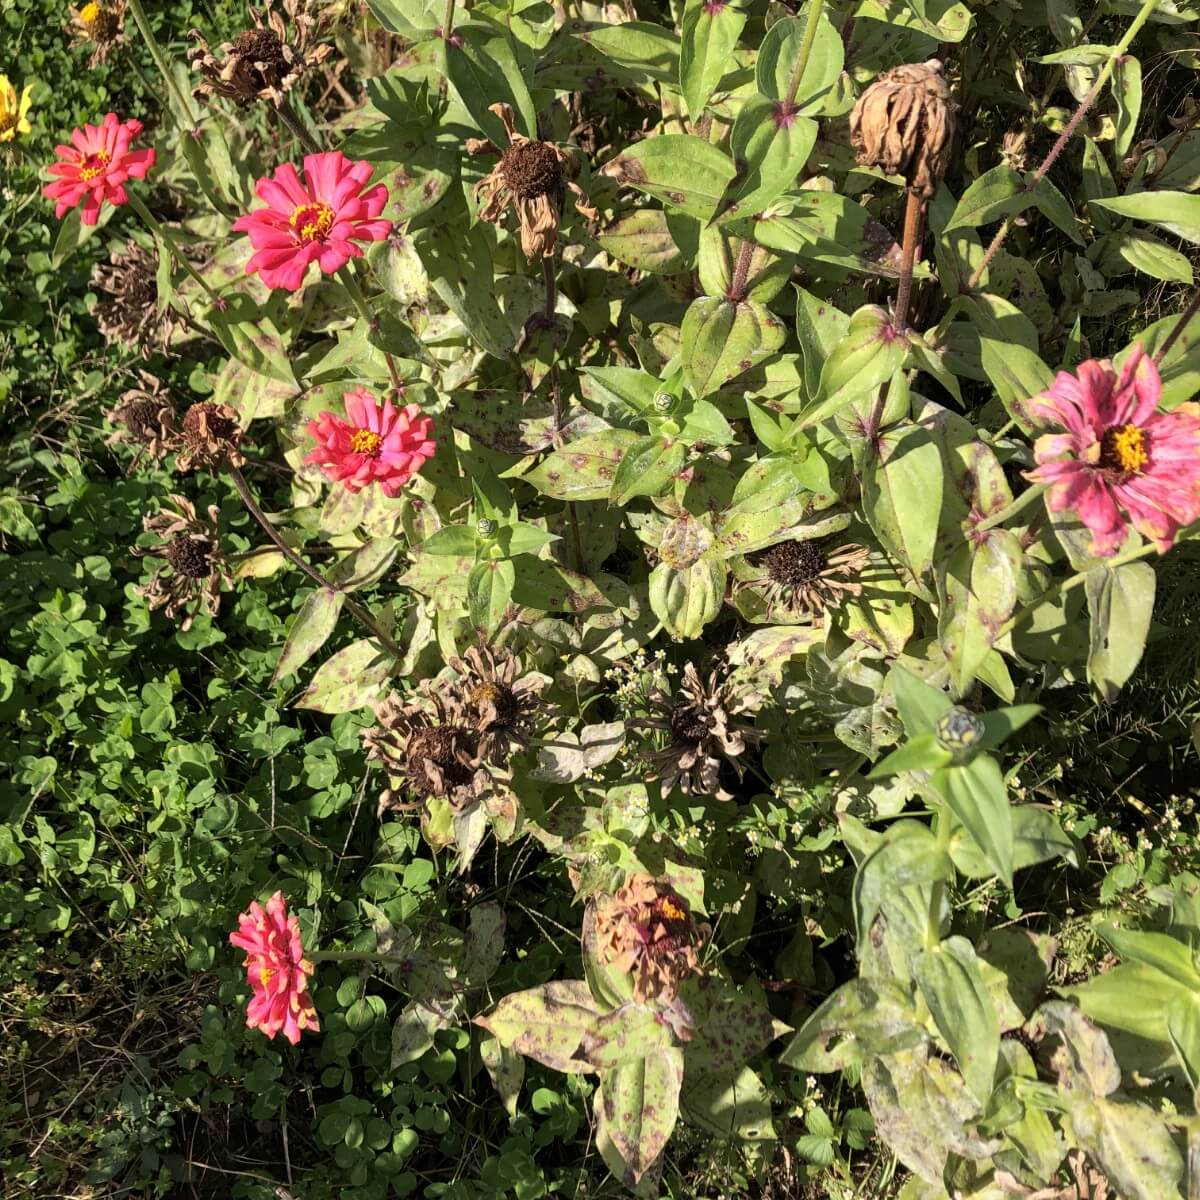 dried seeds and flowers in bloom on zinnia plant